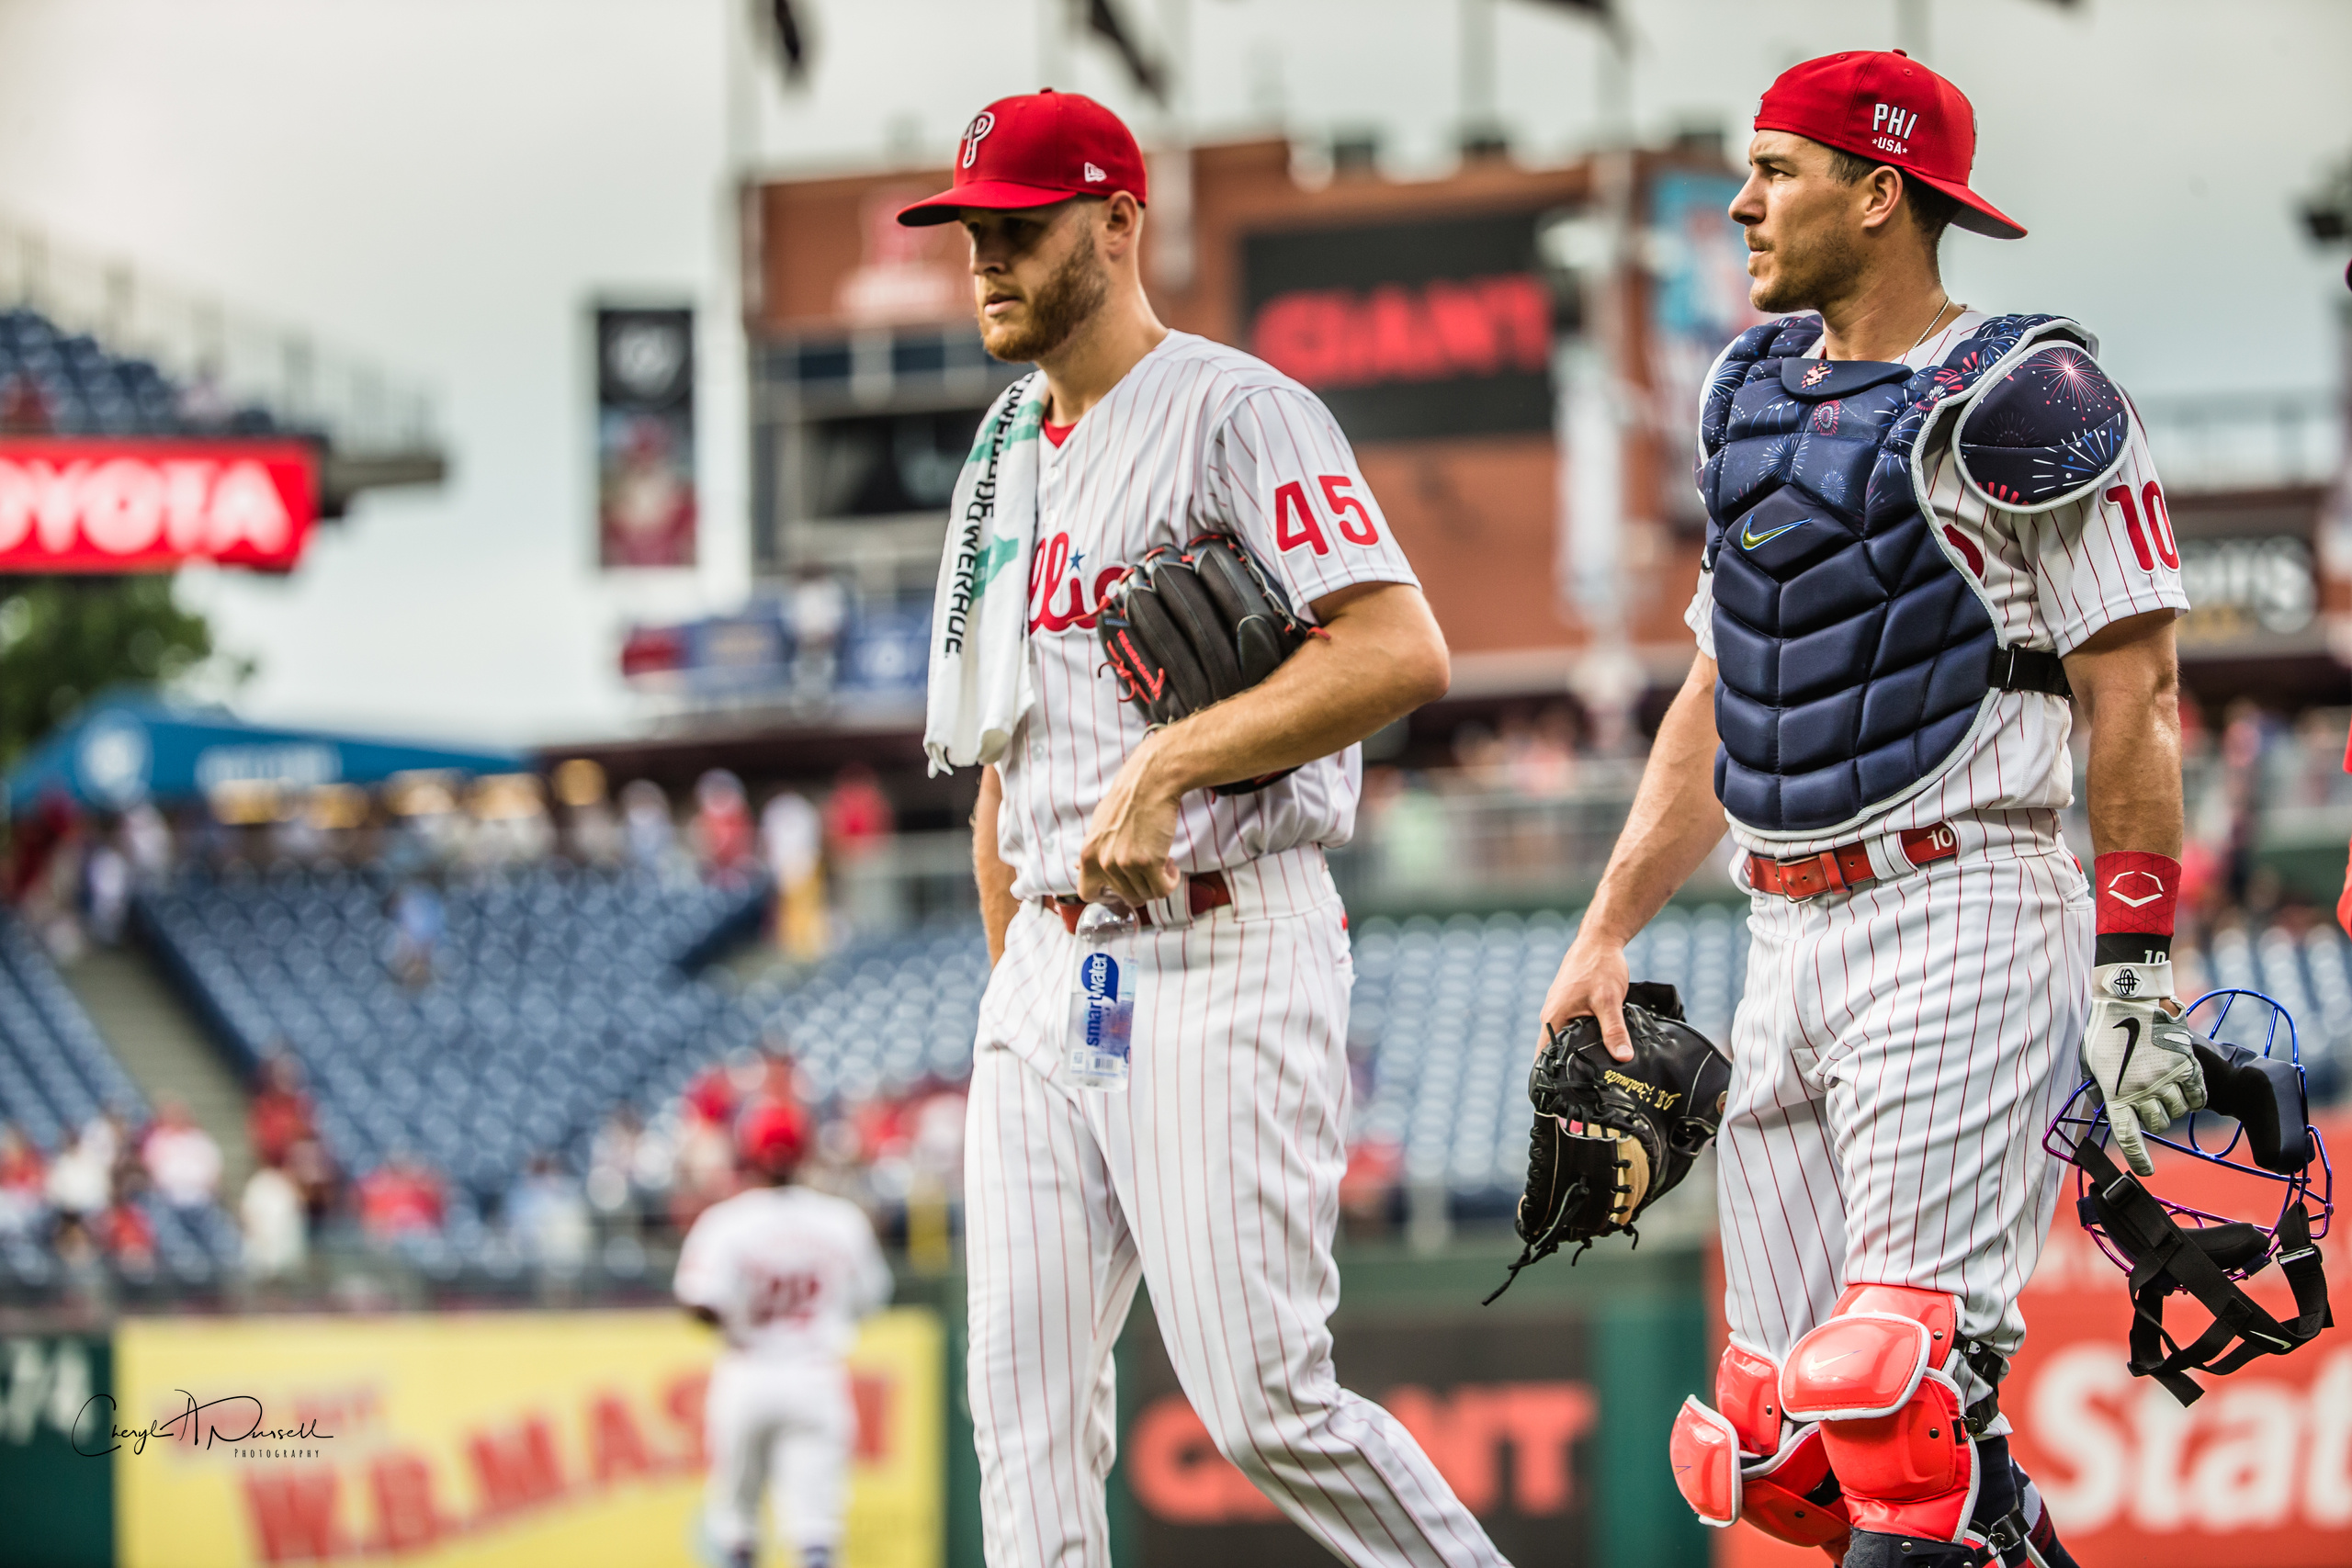 Phillies will have two All-Stars in Zack Wheeler and J.T. Realmuto